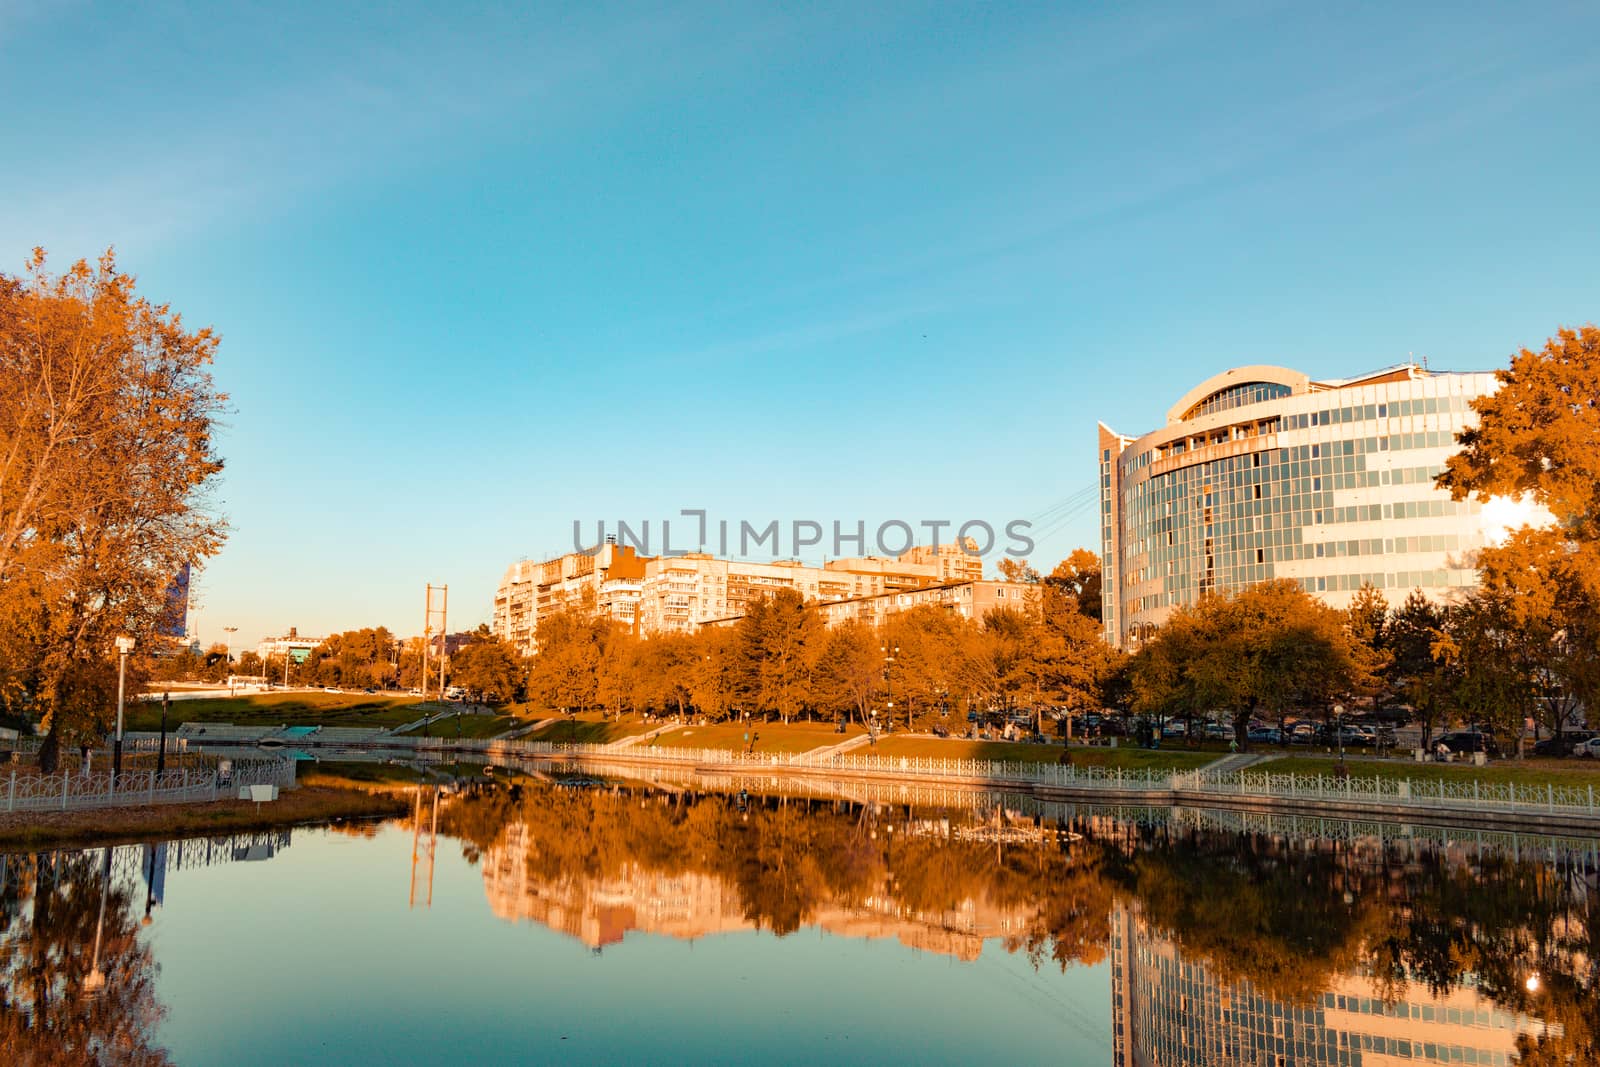 Khabarovsk, Russia - Sep 27, 2018: Urban ponds in the fall by rdv27